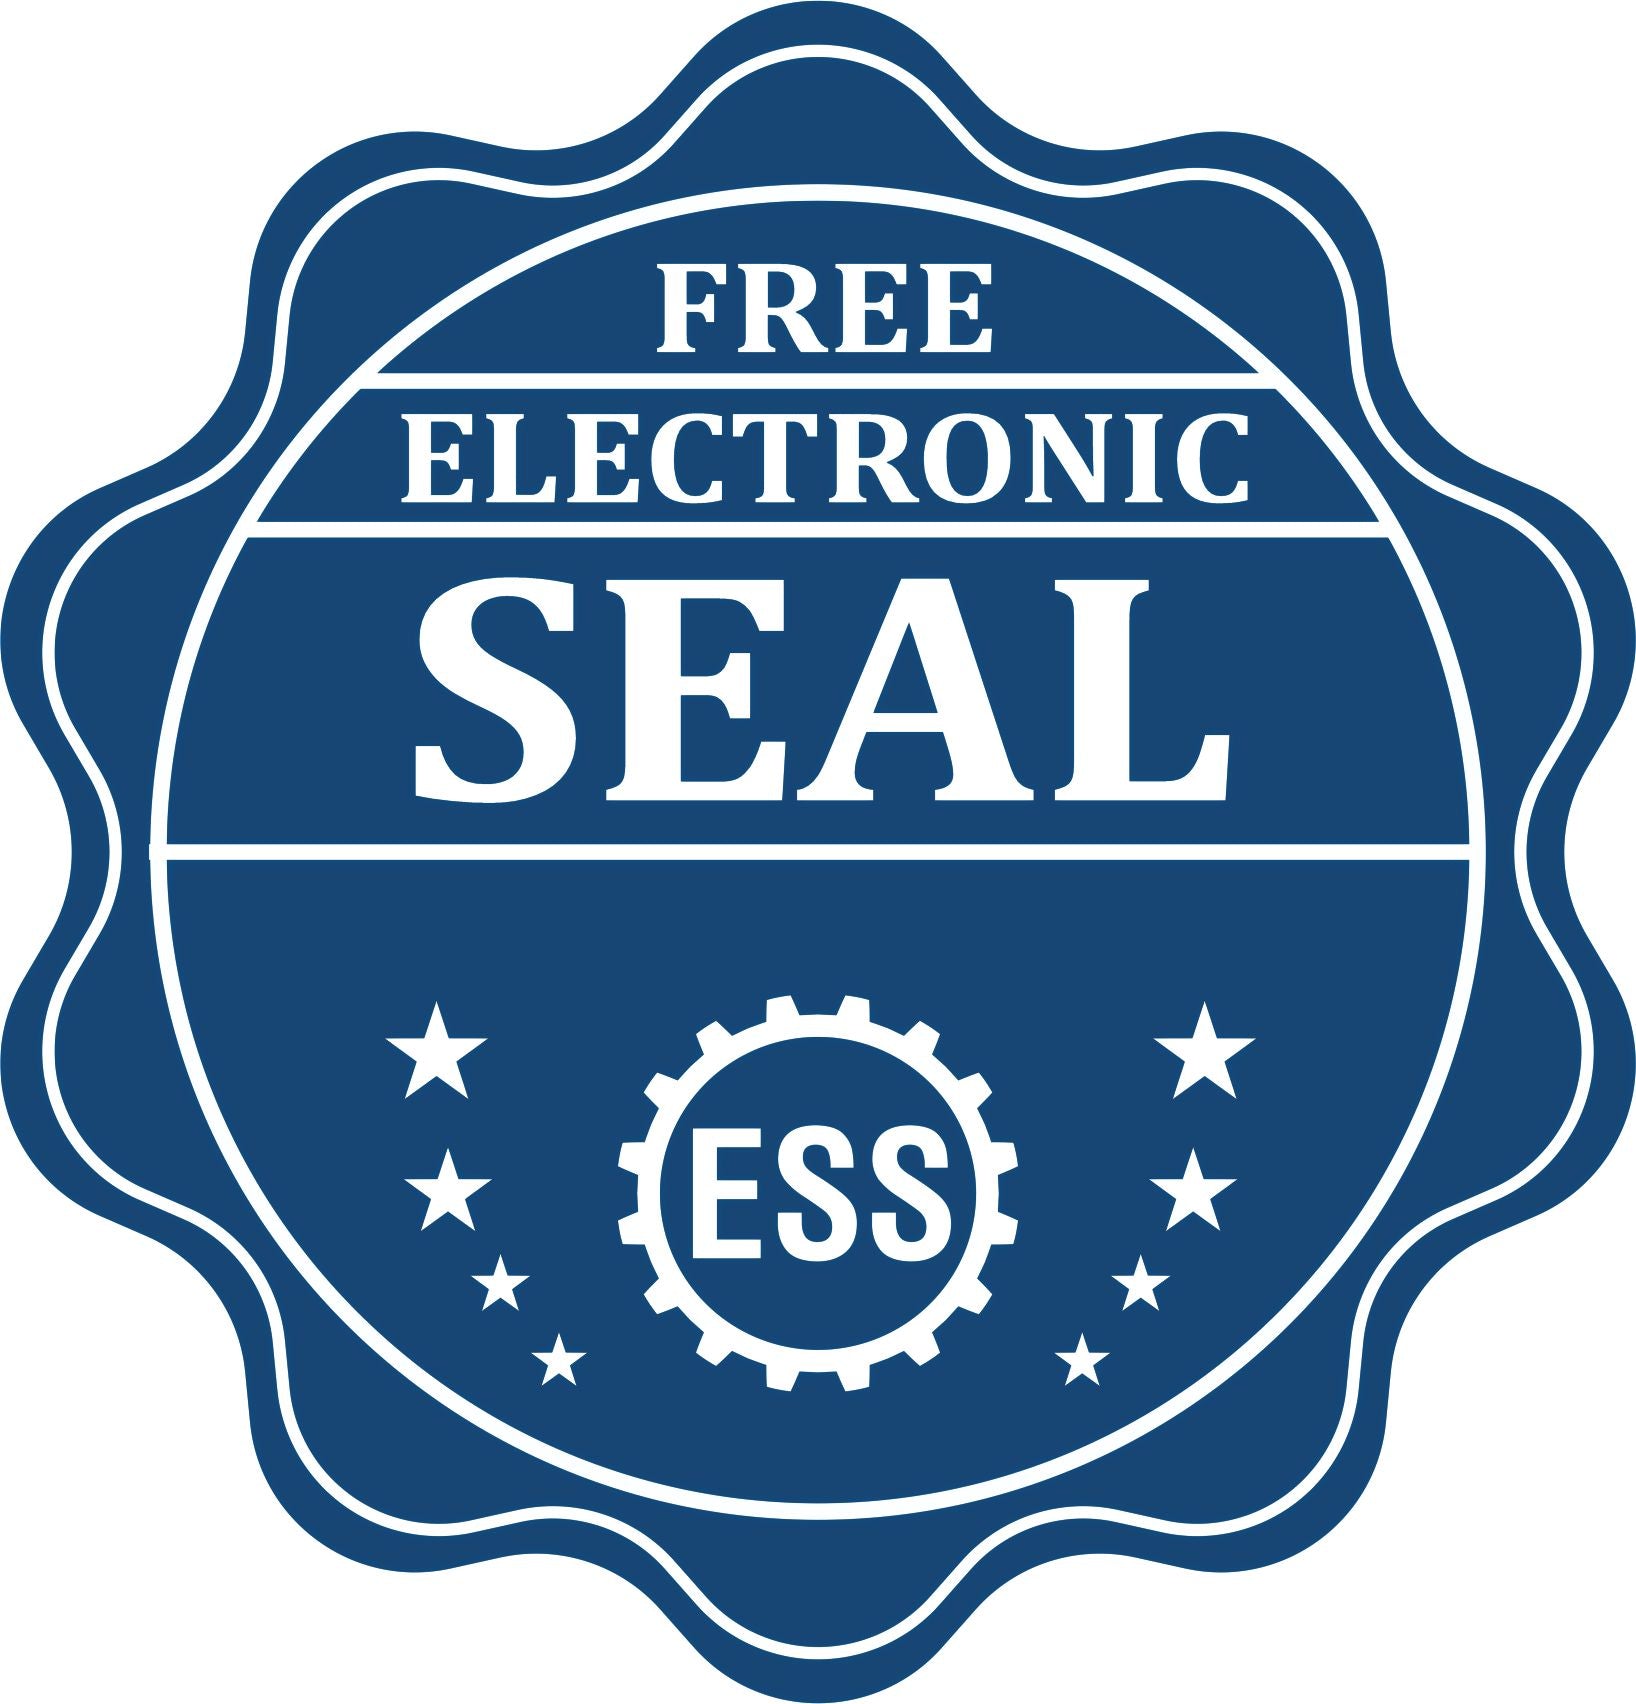 A badge showing a free electronic seal for the Gift Pennsylvania Geologist Seal with stars and the ESS gear on the emblem.